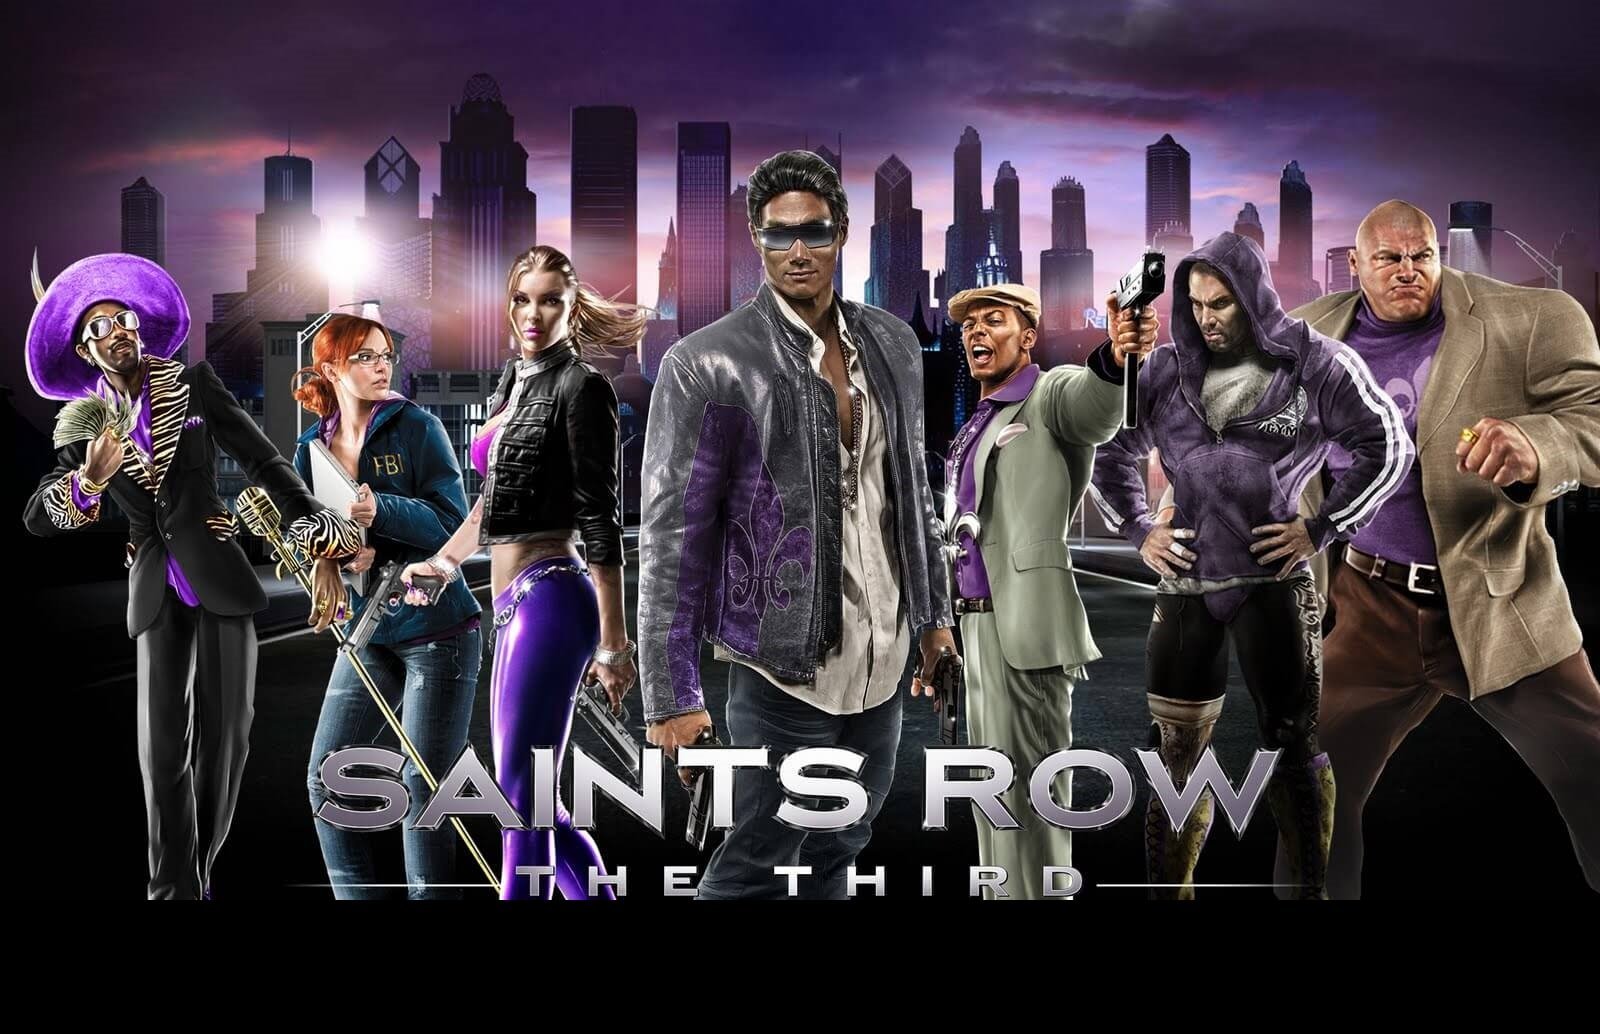 download saints row the third the full package for free